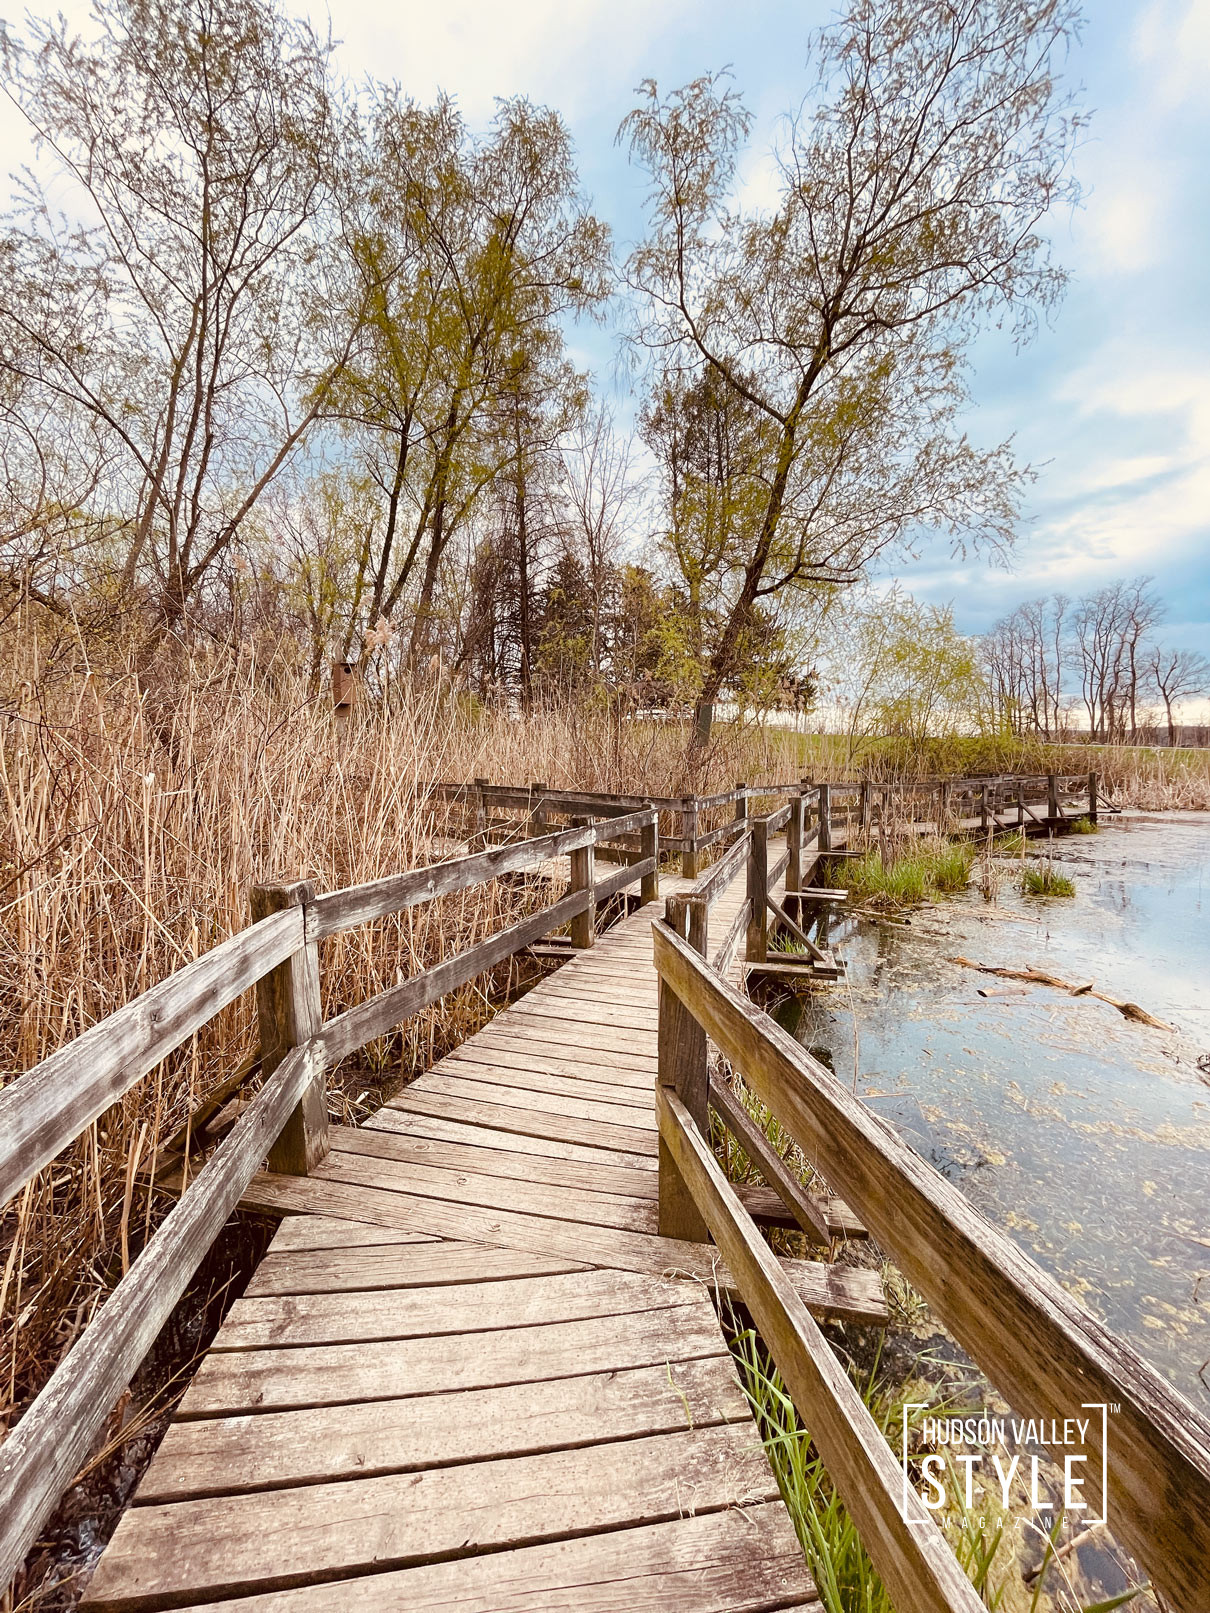 The Magic of Spring – Photographer Maxwell Alexander Shares a Photo Story from Hudson Valley's Bowdoin Park – Nature Photography – Photo Gallery